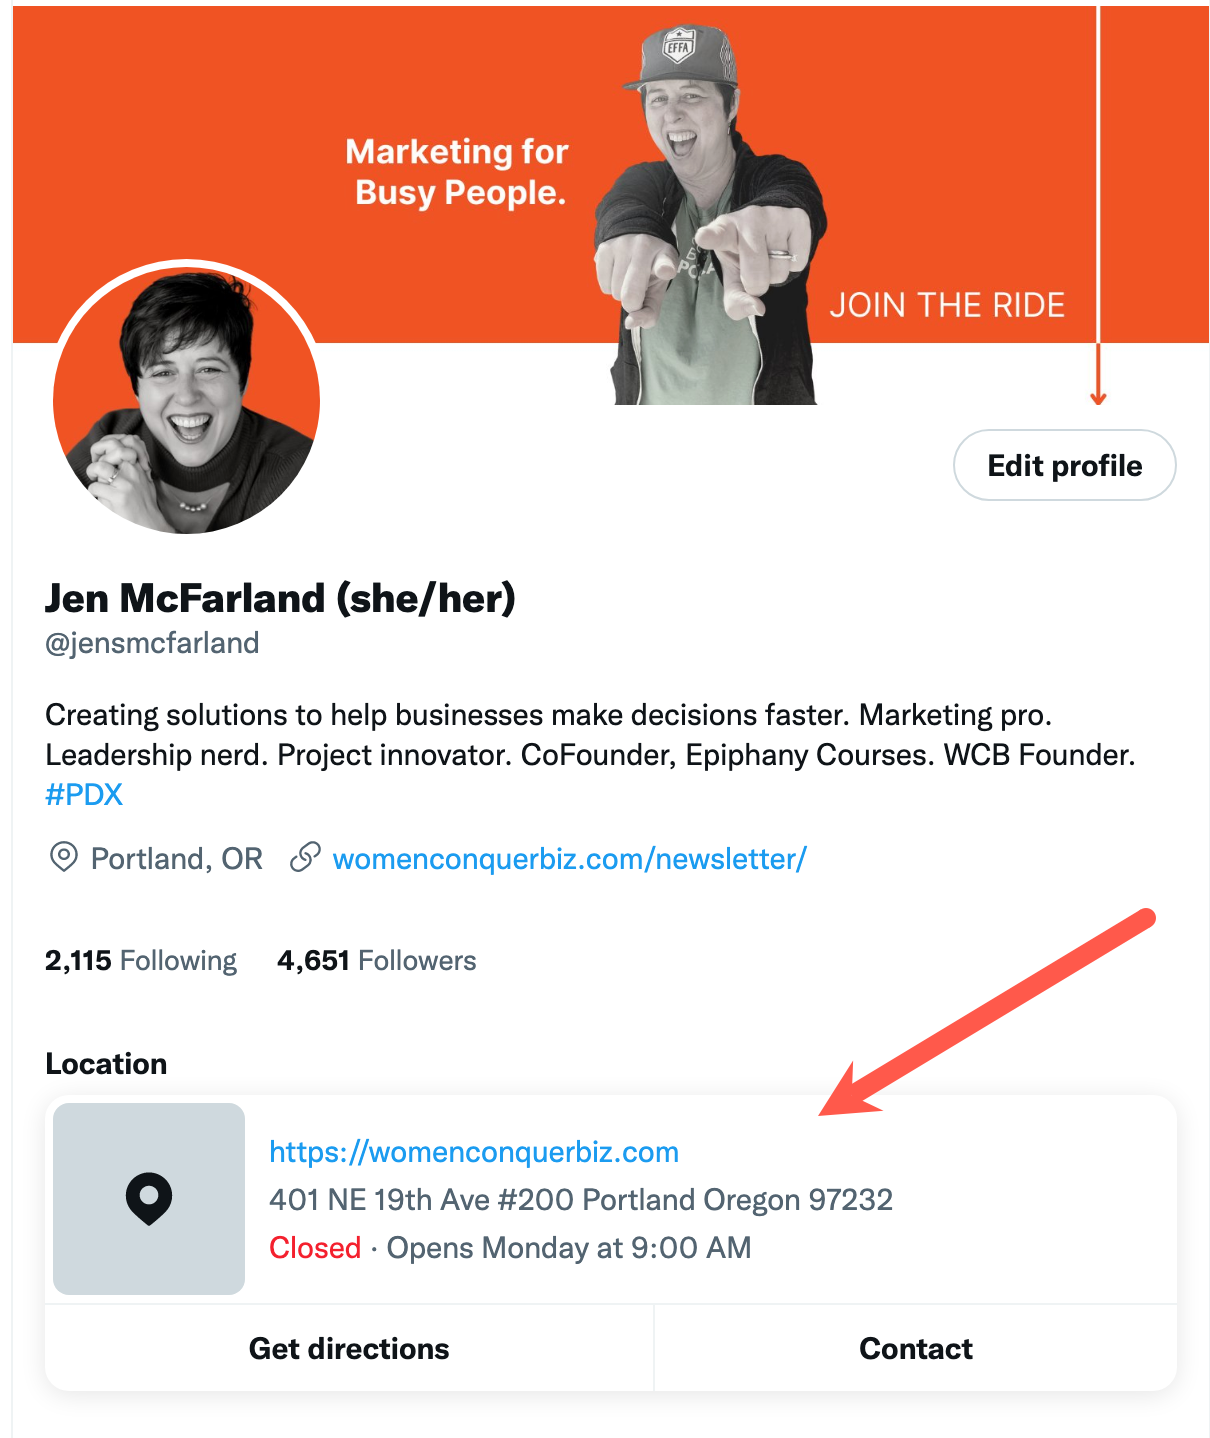 Here's an example of a completed location spotlight on Twitter, including website, address, hours and contact information.